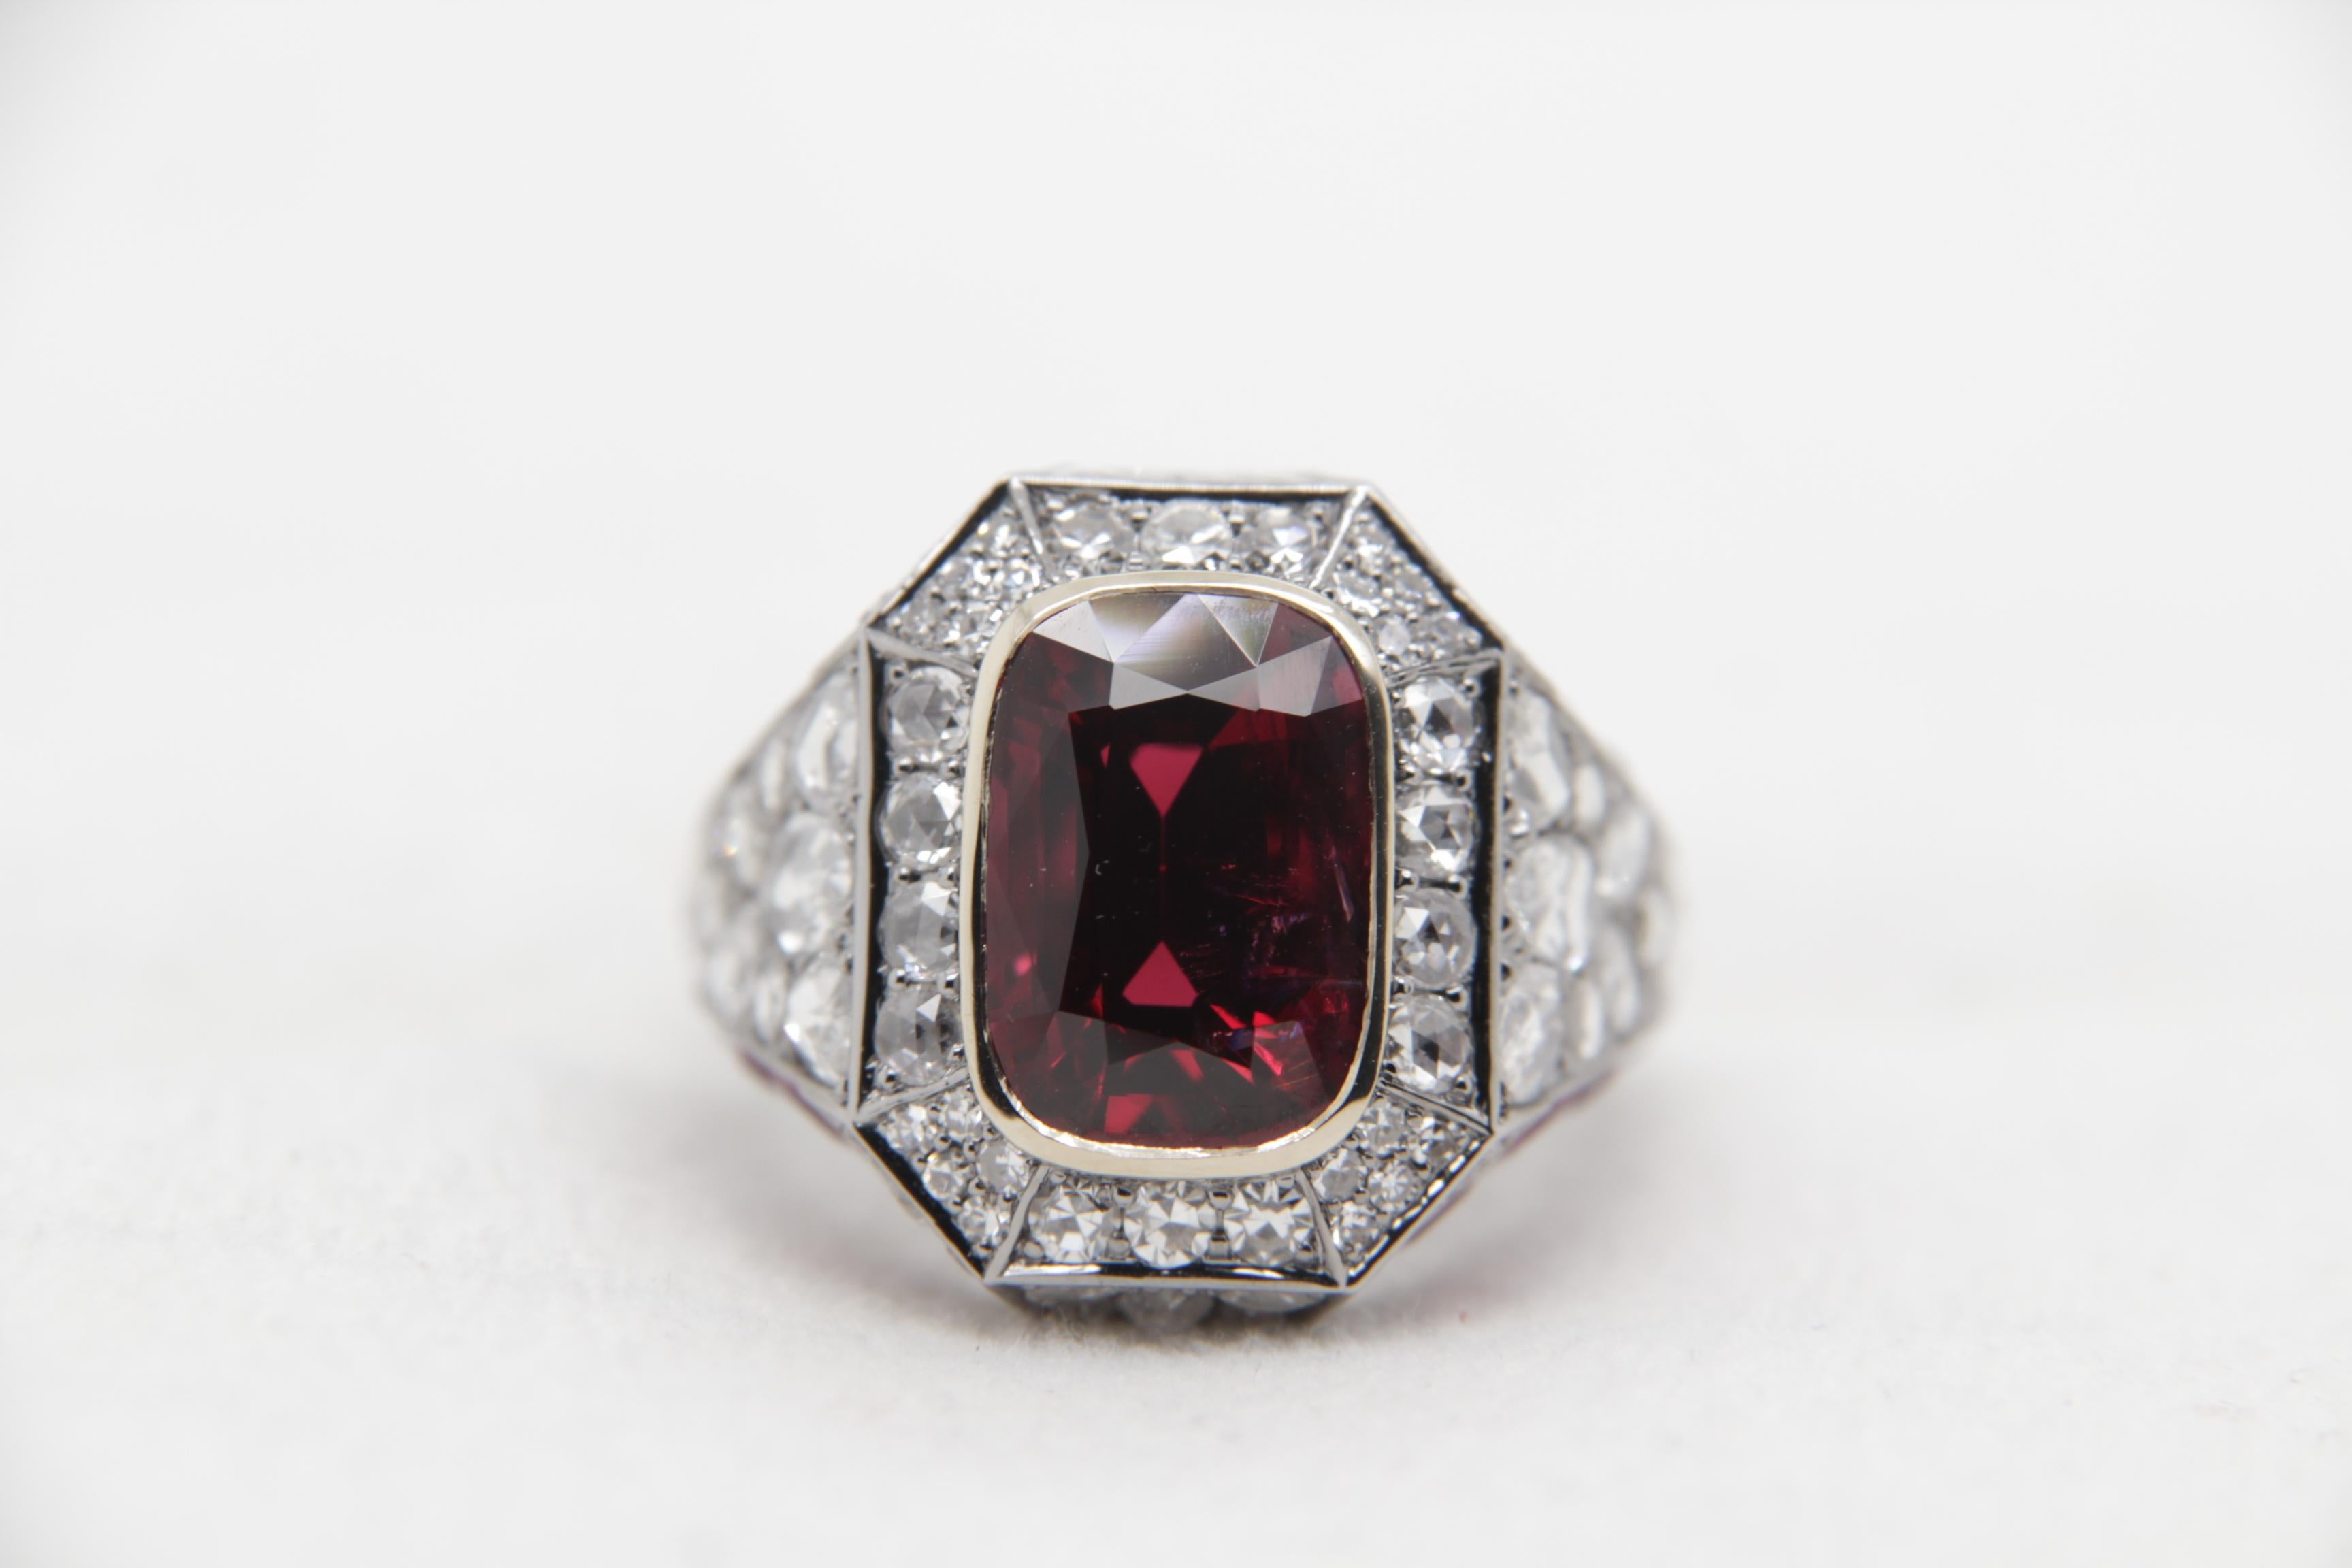 A brand new spinal, ruby and diamond ring in 18 K gold. The spinal weighs 5.28 carats and is certified by Gem Research Swisslab (GRS) as natural, no heat, and 'Vivid Red'. The total ruby weight is 1.86 carats and diamond weight is 1.88 carats. The